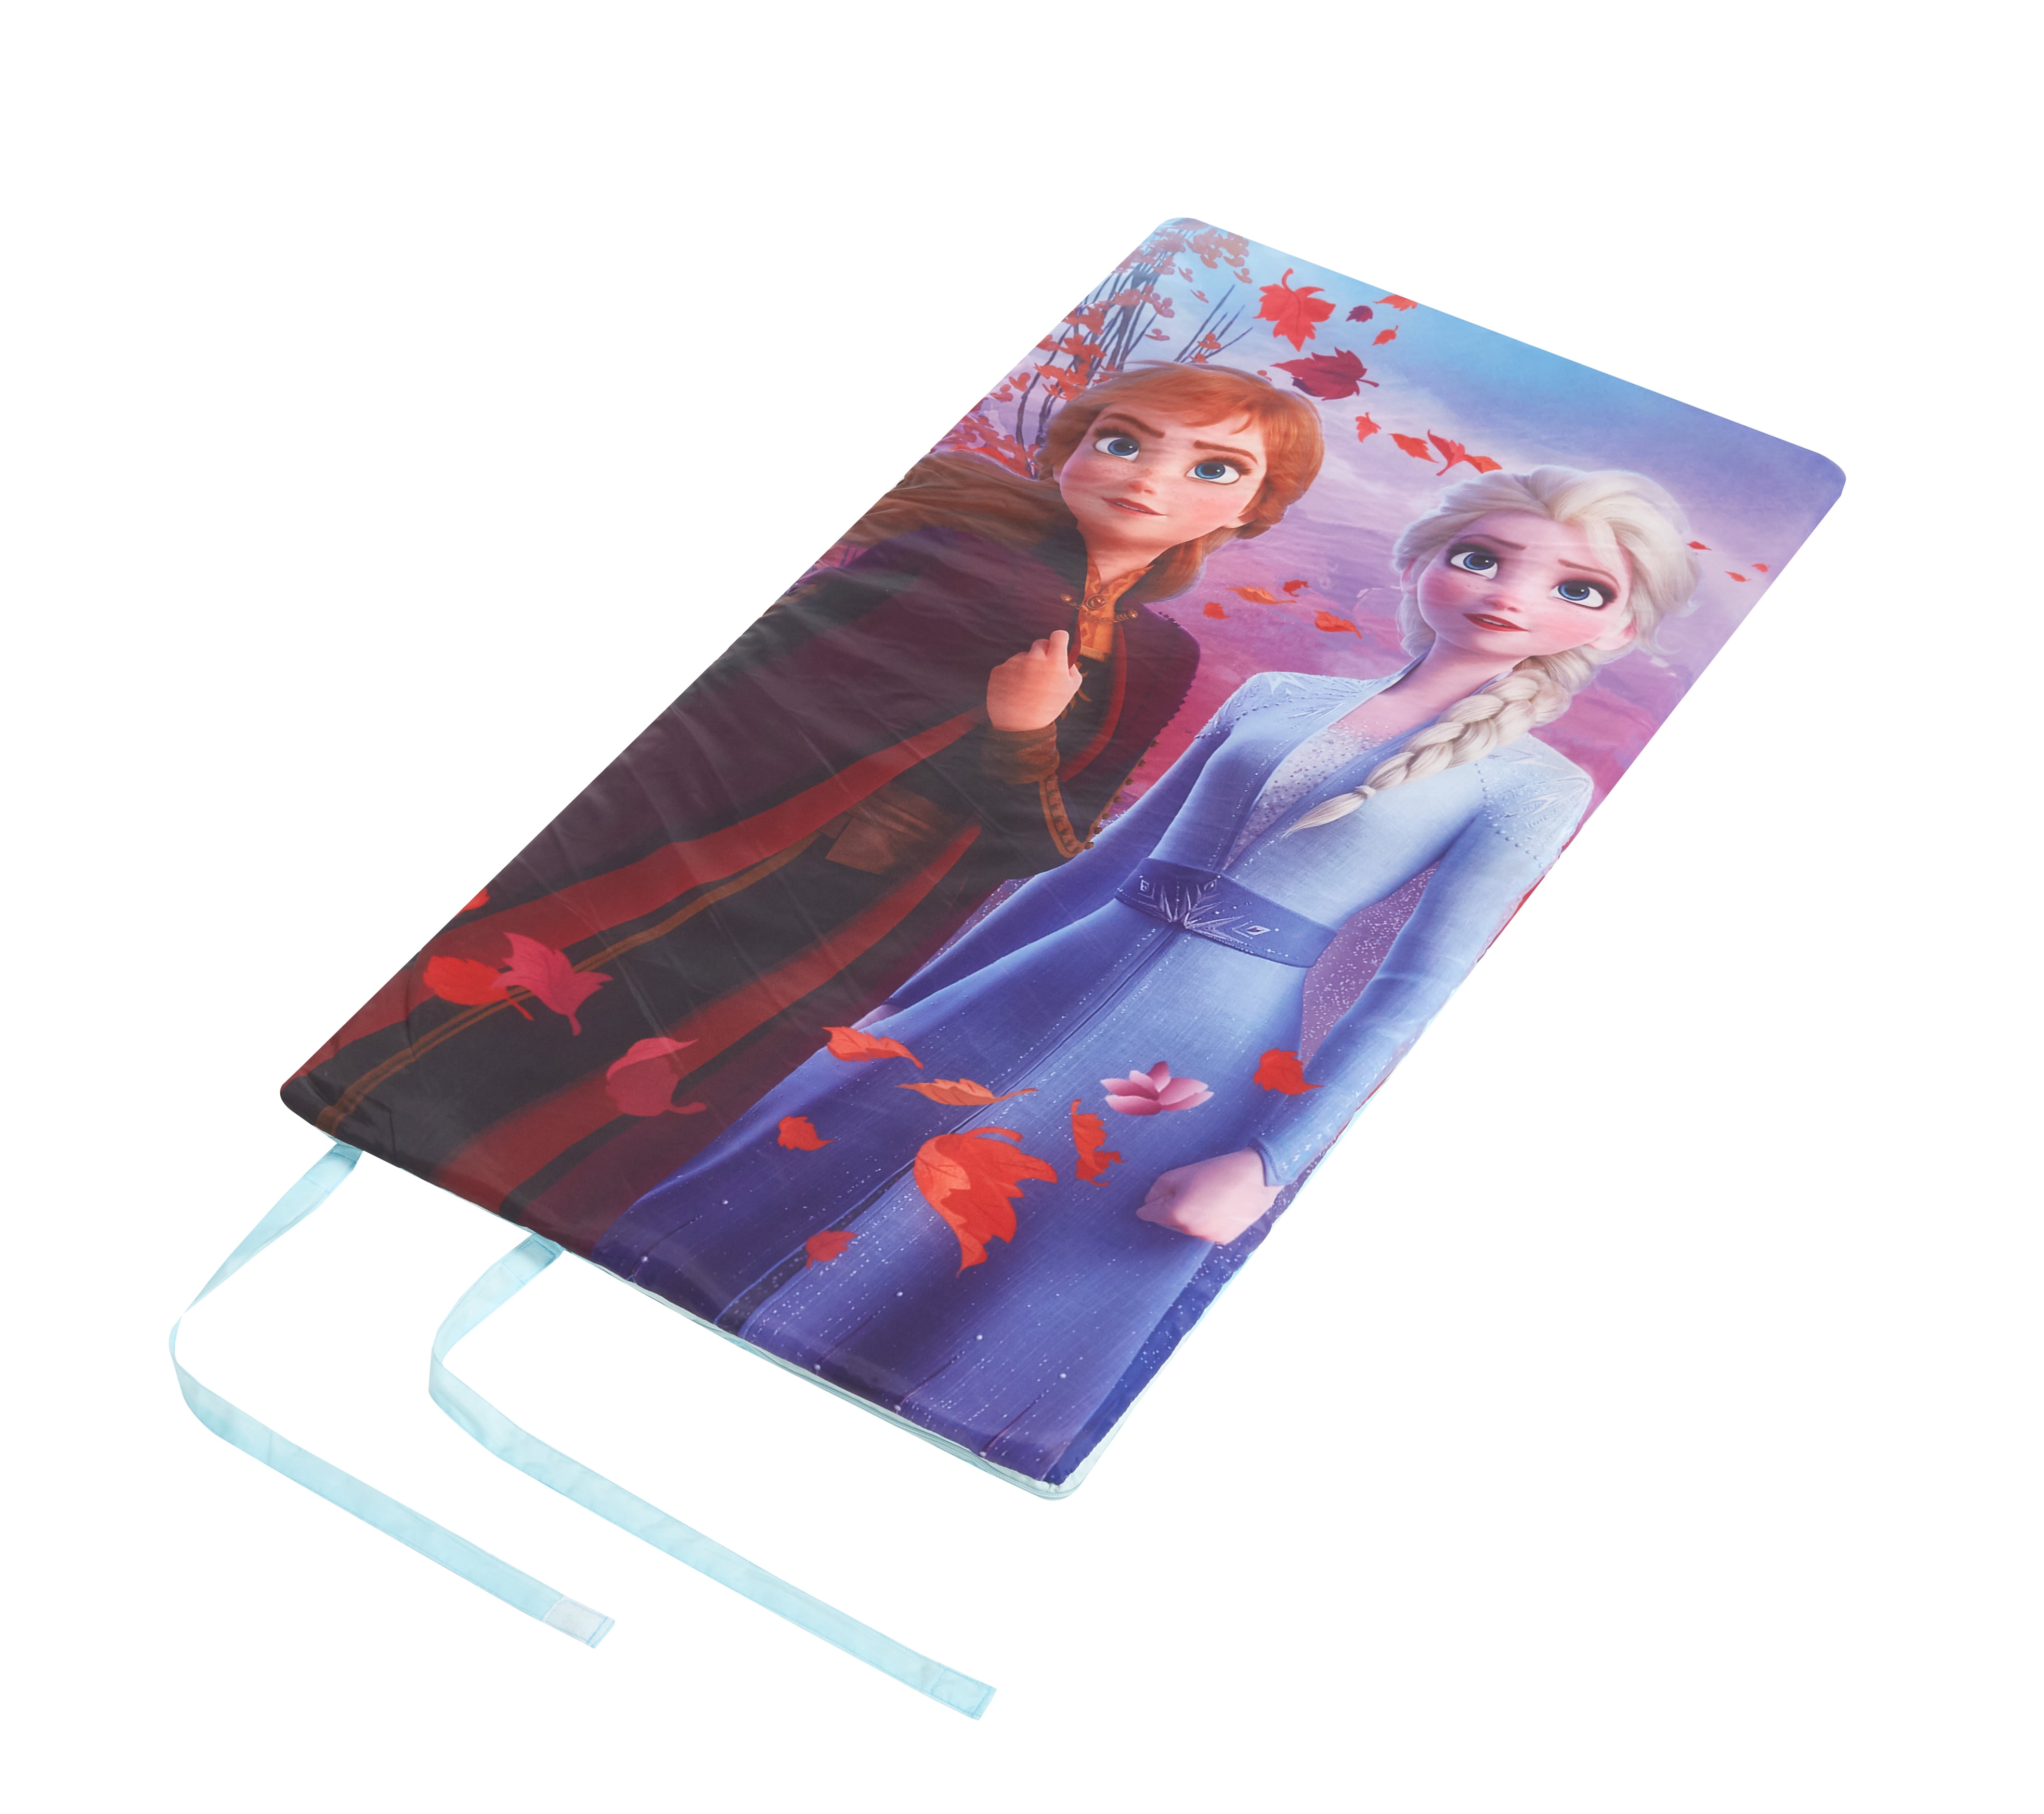 Frozen II Sleeping Bag My First with Carrying Case Anna Elsa Destinys Calling for Kids Sleepovers Overnights Camping 28 inches x 56 inches 